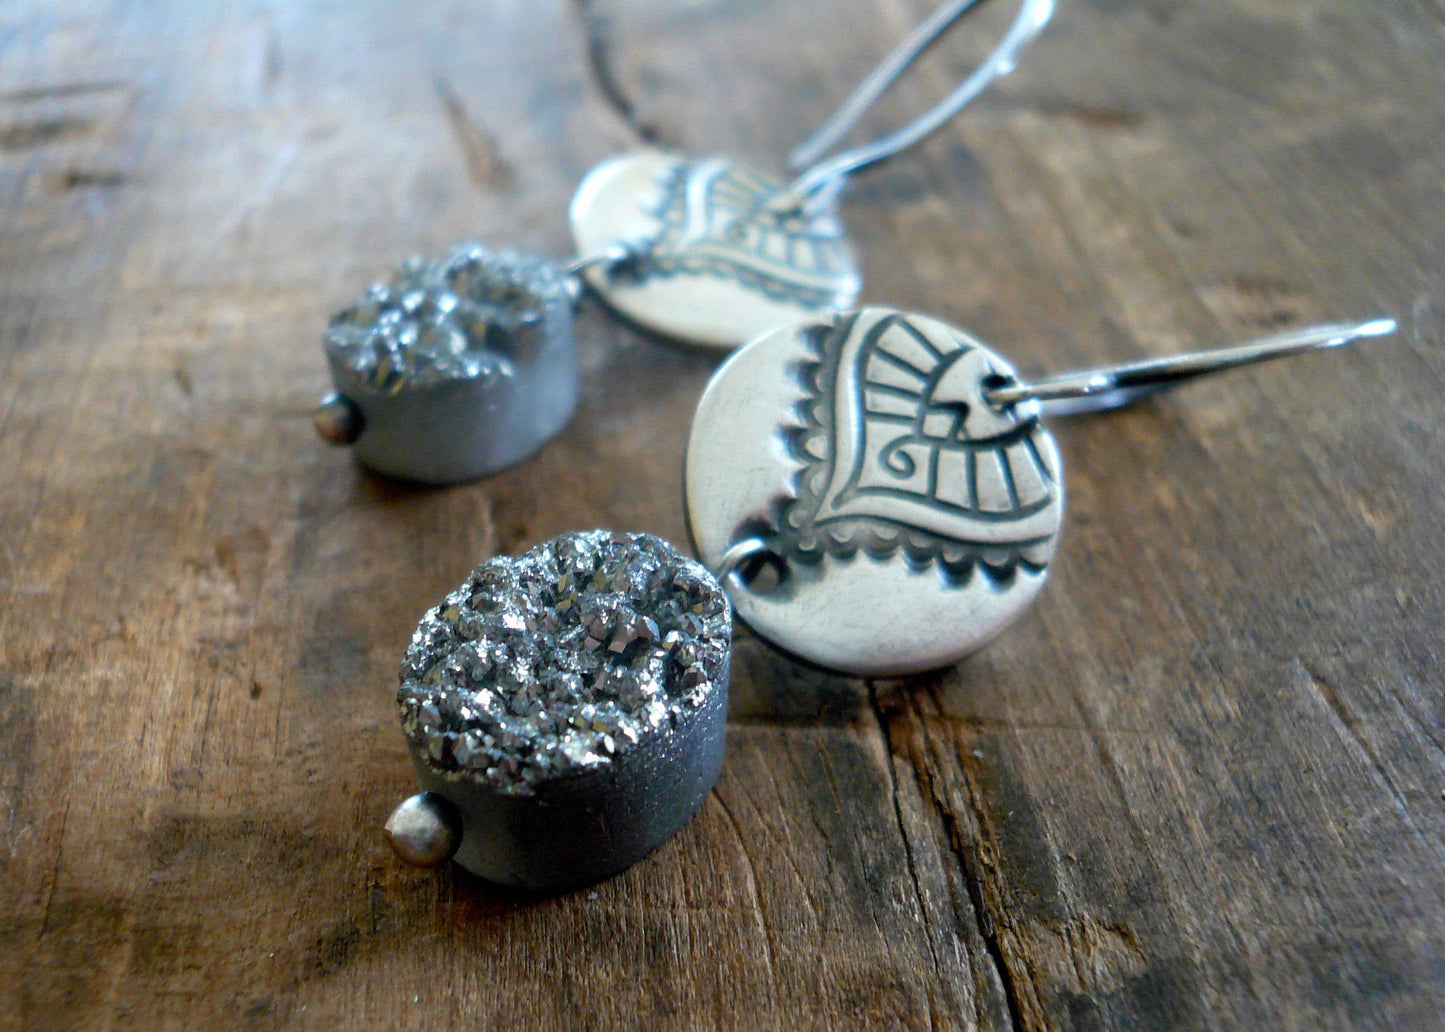 Noceur Oval Earrings - Handmade. Oxidized fine and sterling silver. Druzy